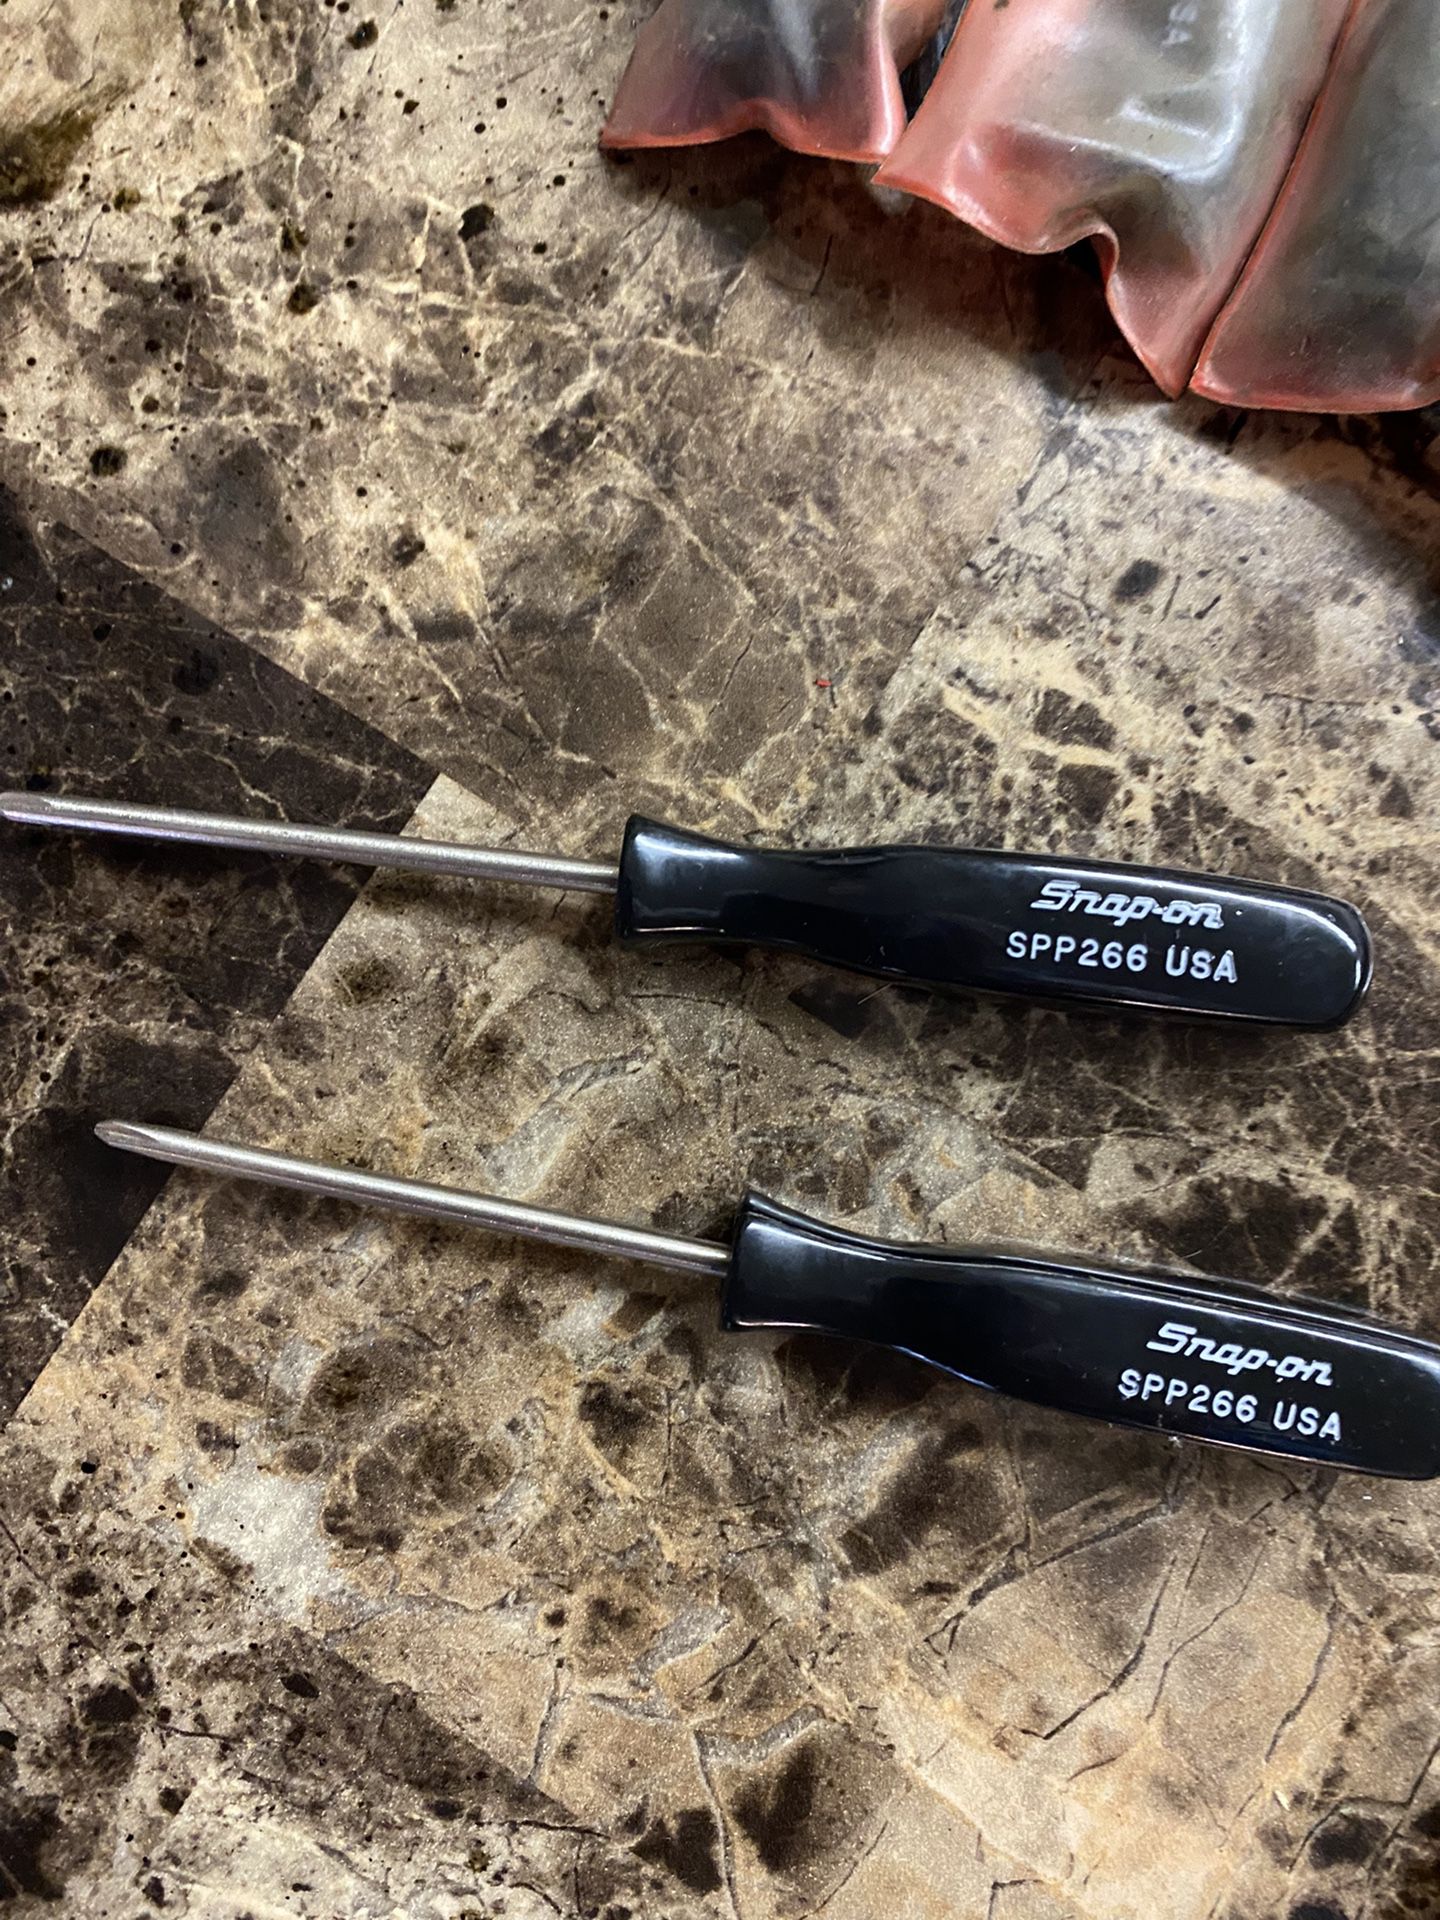 Snap On Phillips Screwdrivers